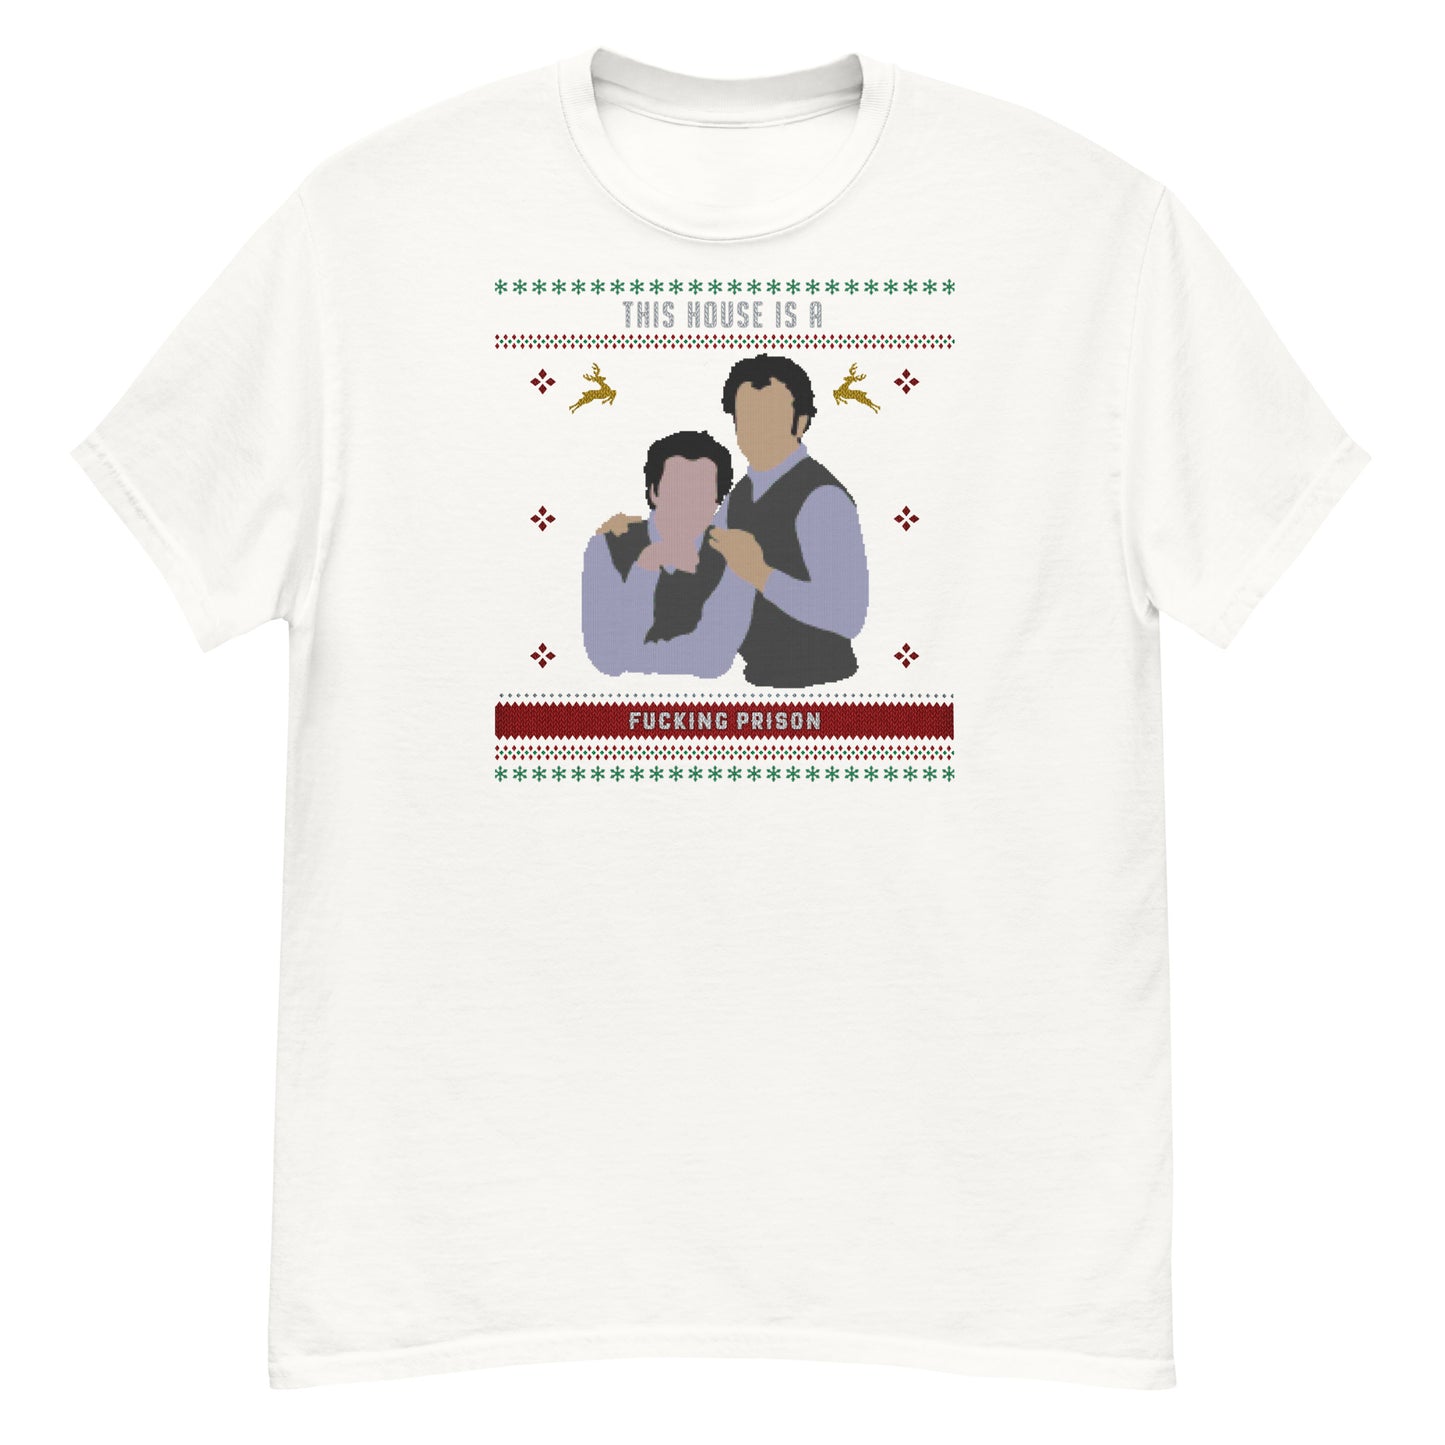 This House is a Prison X-Mas Tee - classic tee